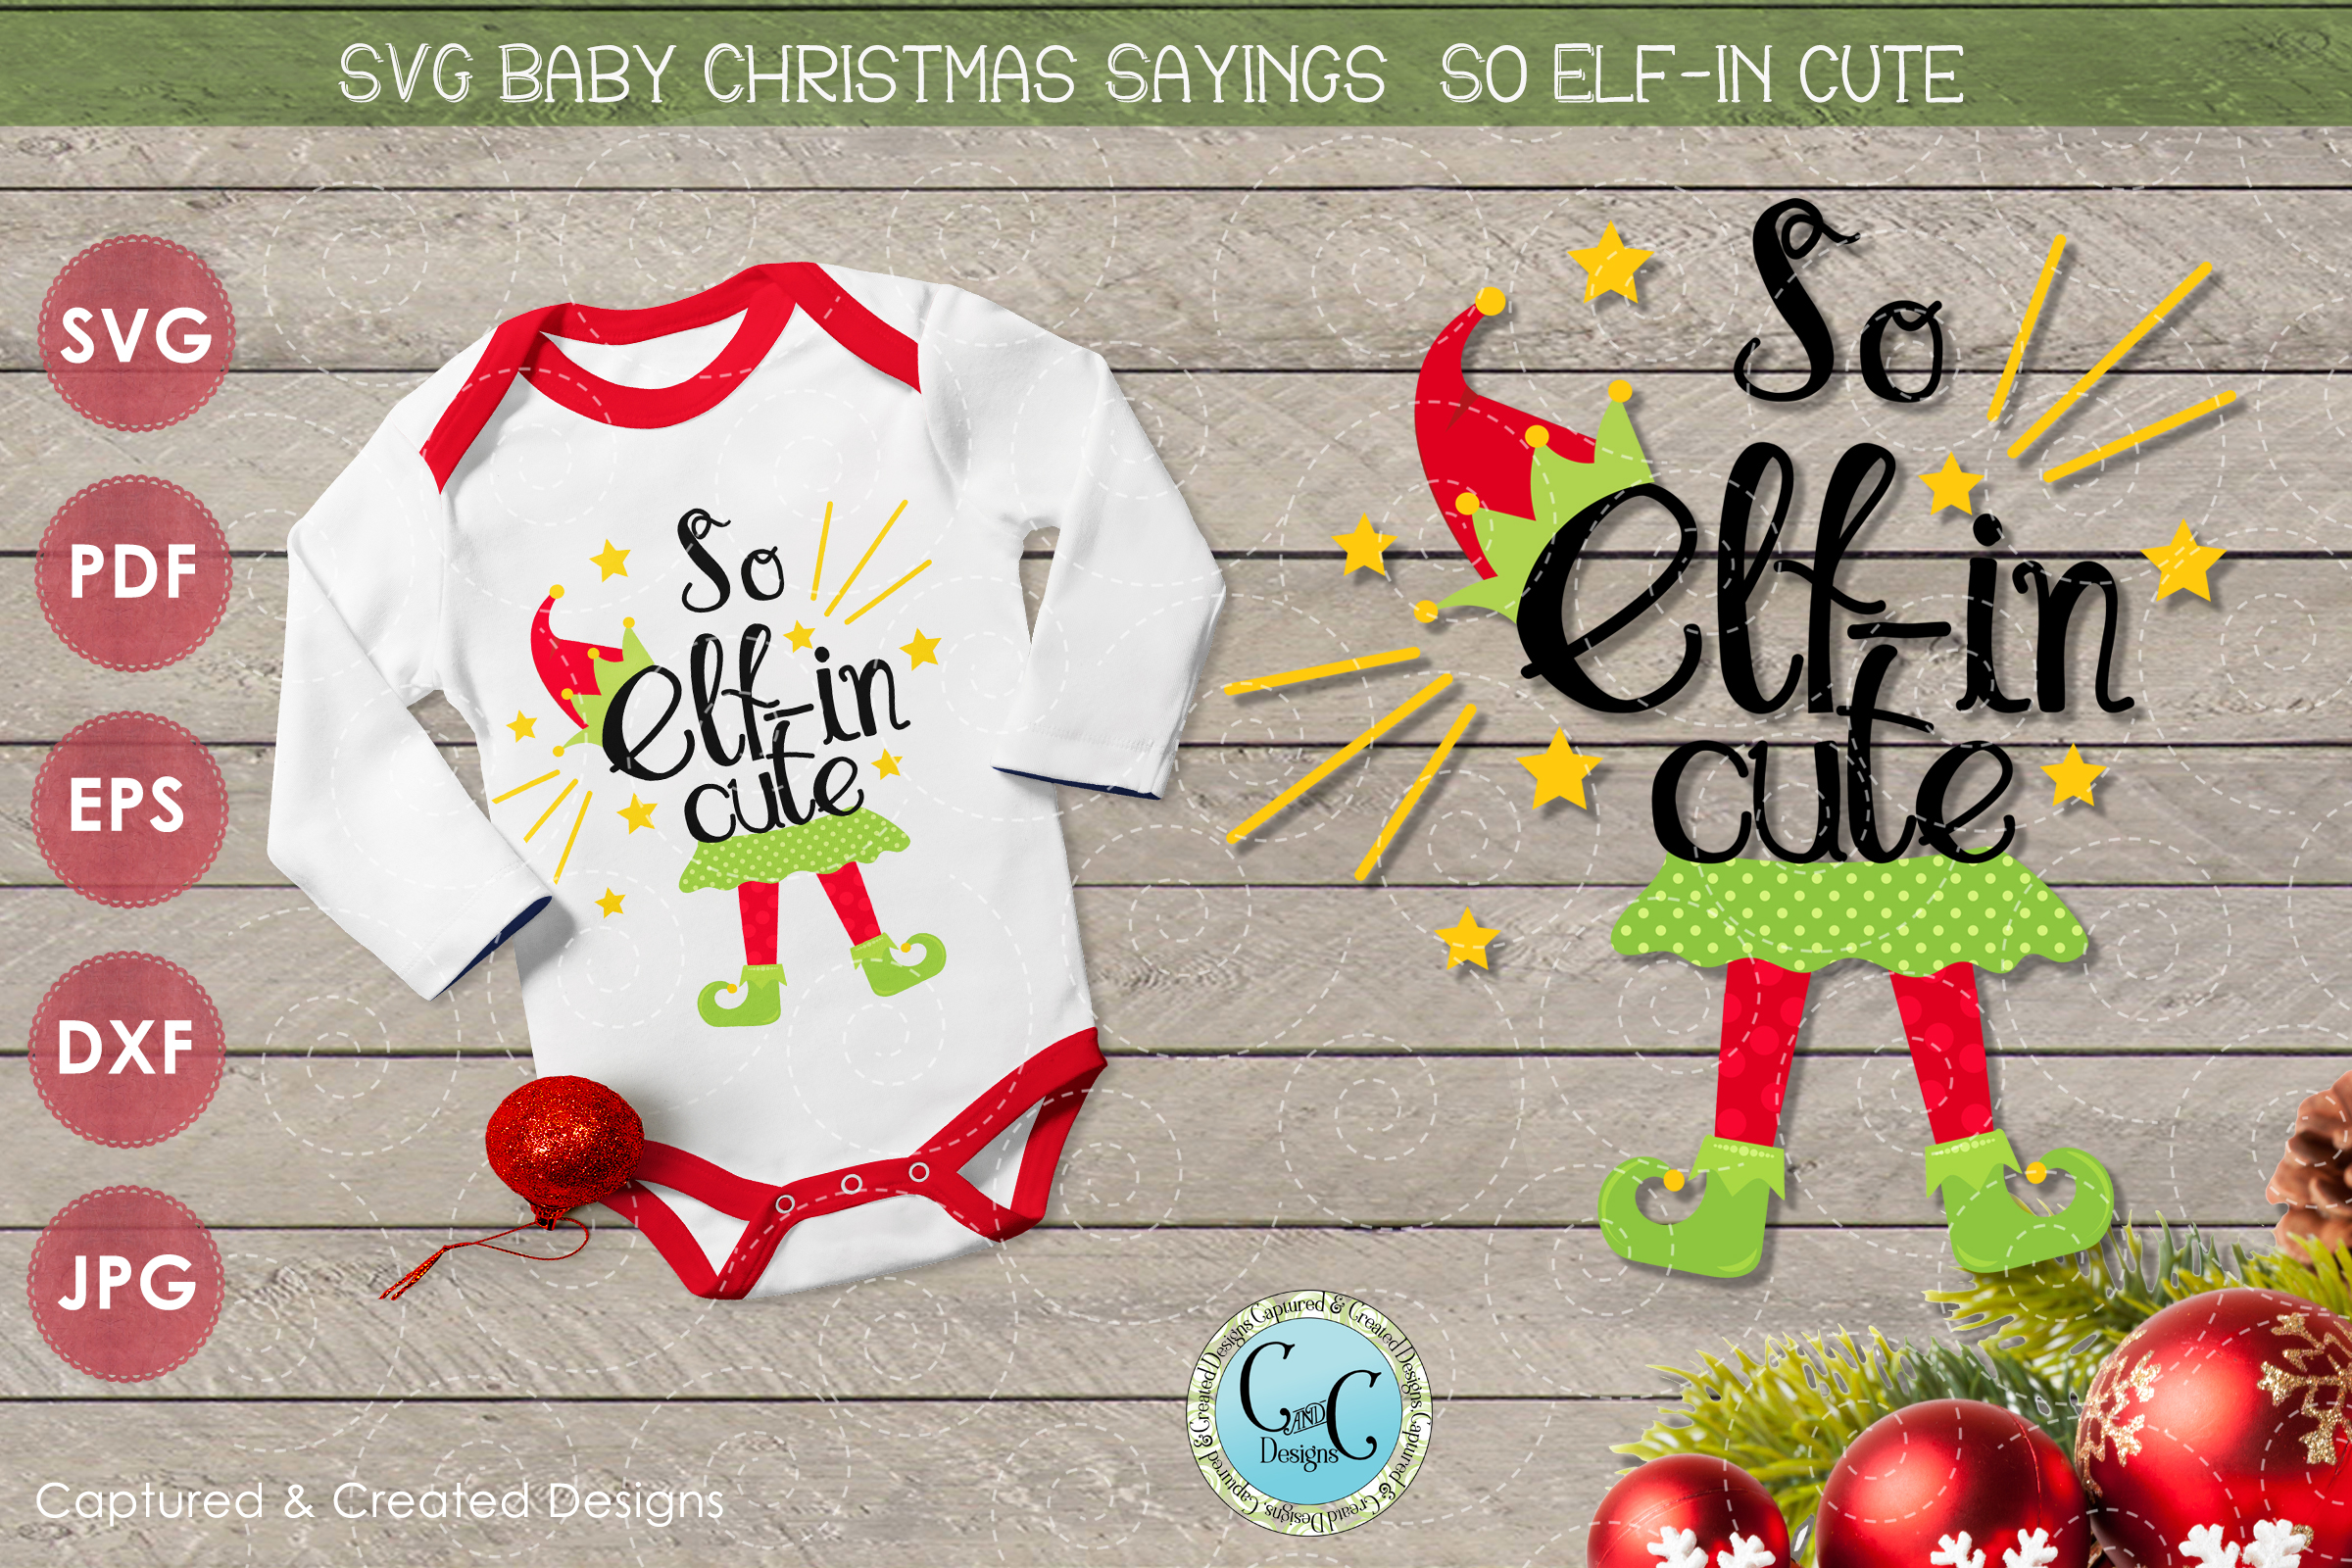 Download SVG Christmas Sayings-So Elf-in Cute Girl- Adorable Cutting